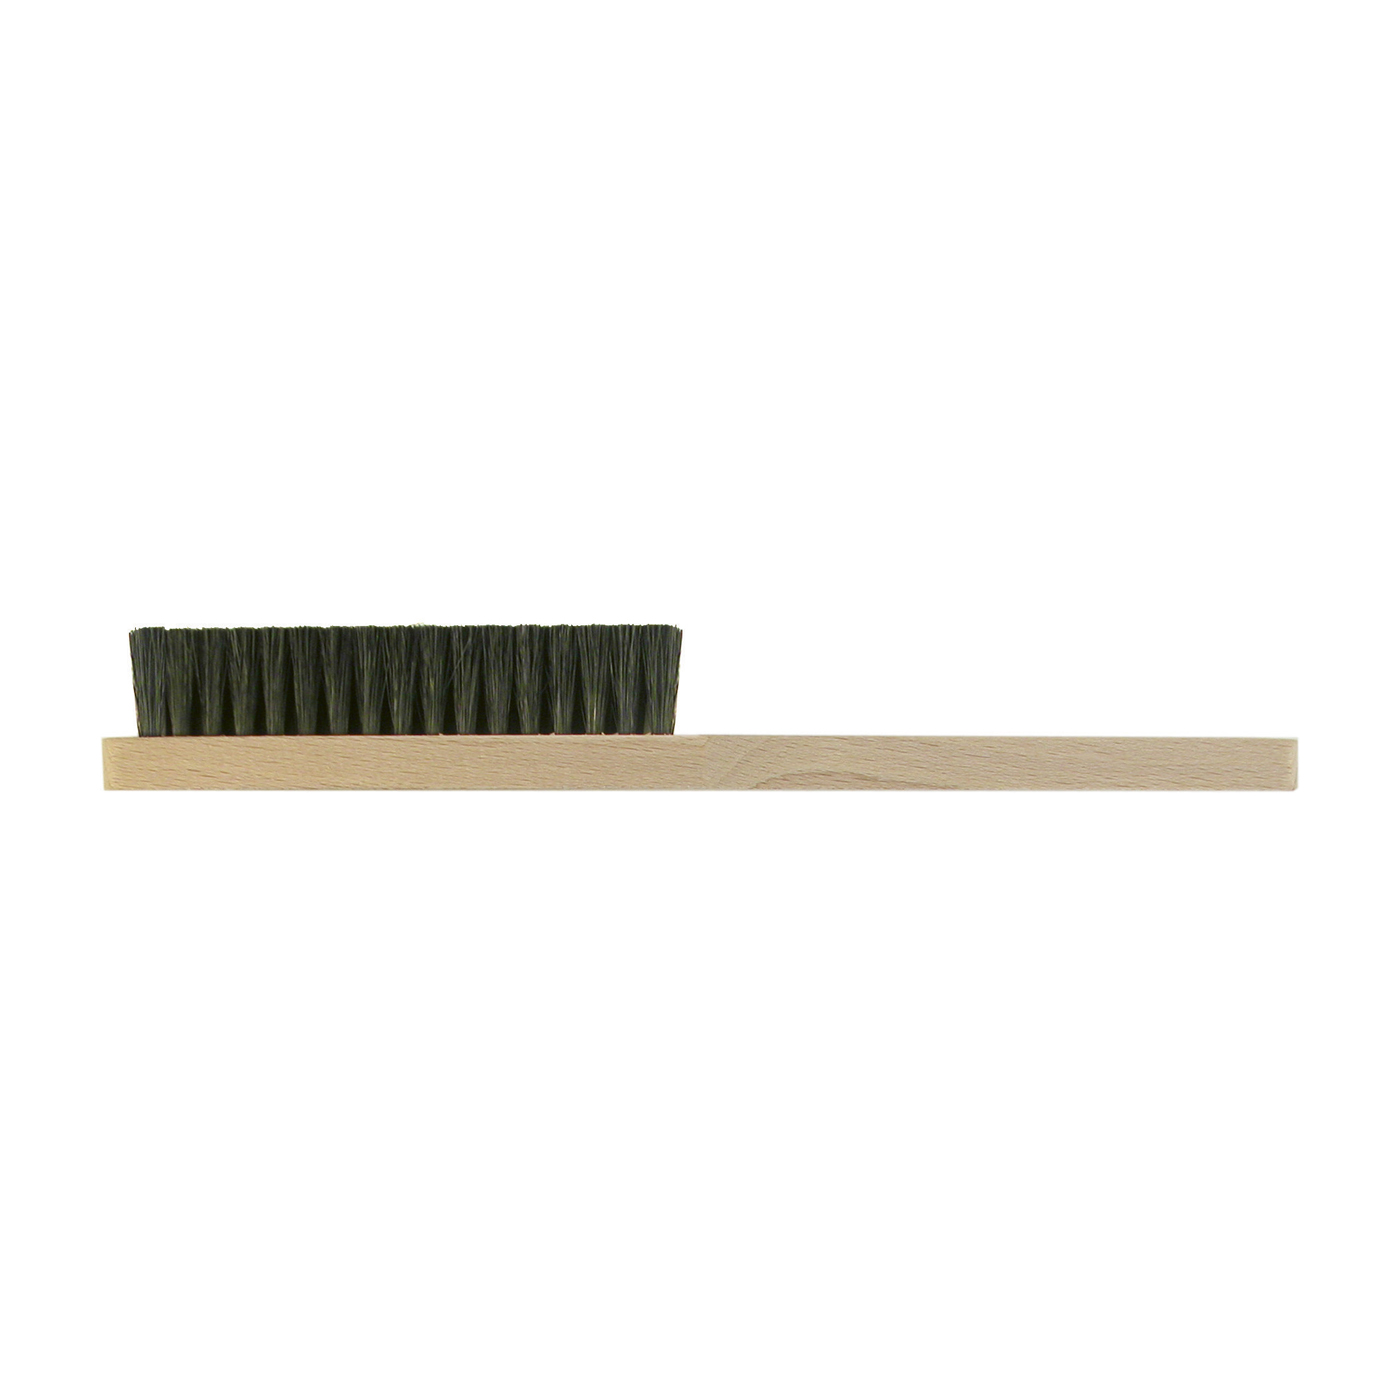 Washout Brush, 3 Rows, 220 mm - 1 piece